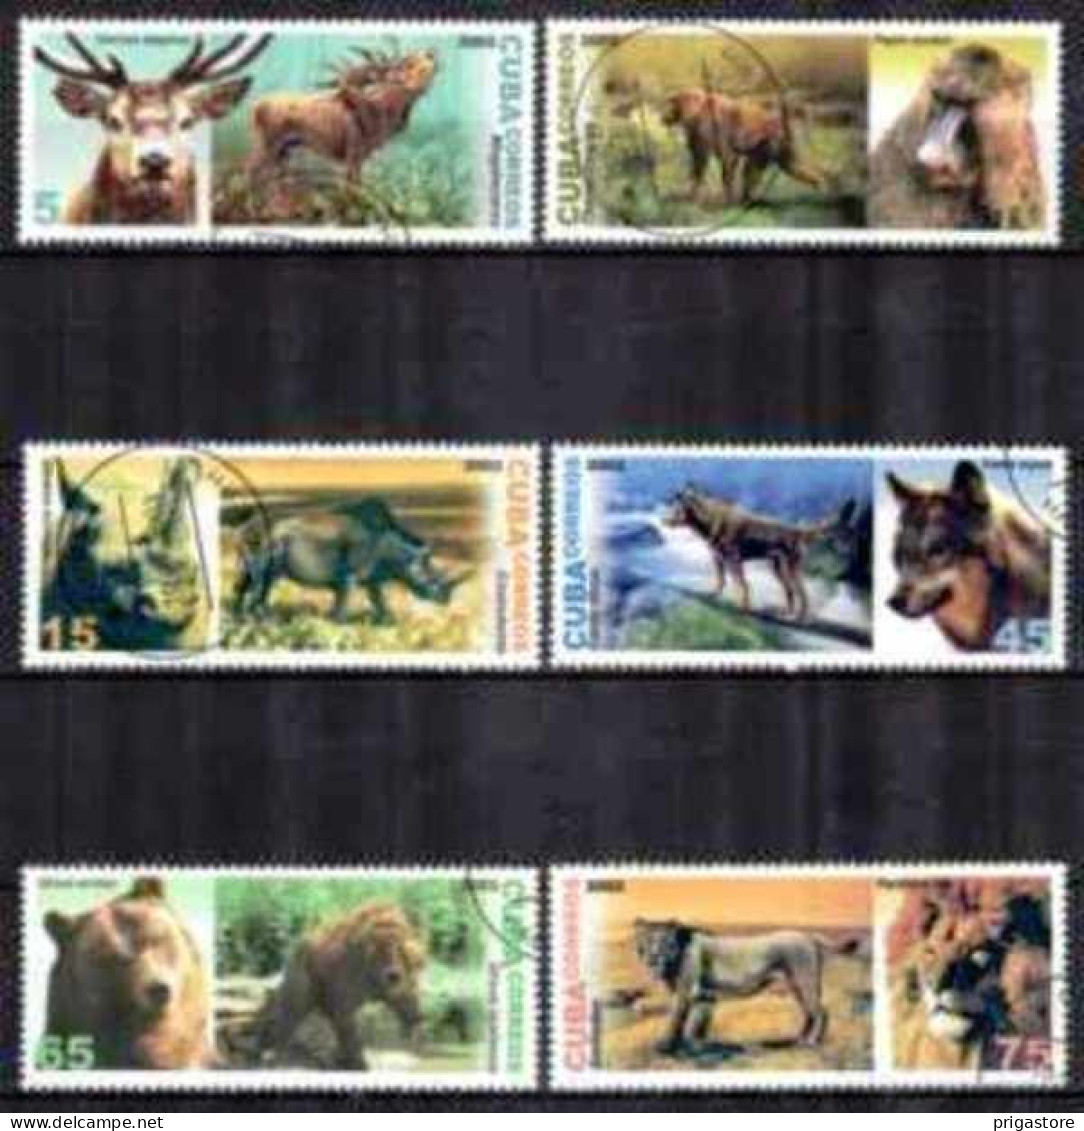 Cuba 2002 Animaux Sauvages (6) Yvert N° 4059A à 4059F Oblitéré Used - Used Stamps